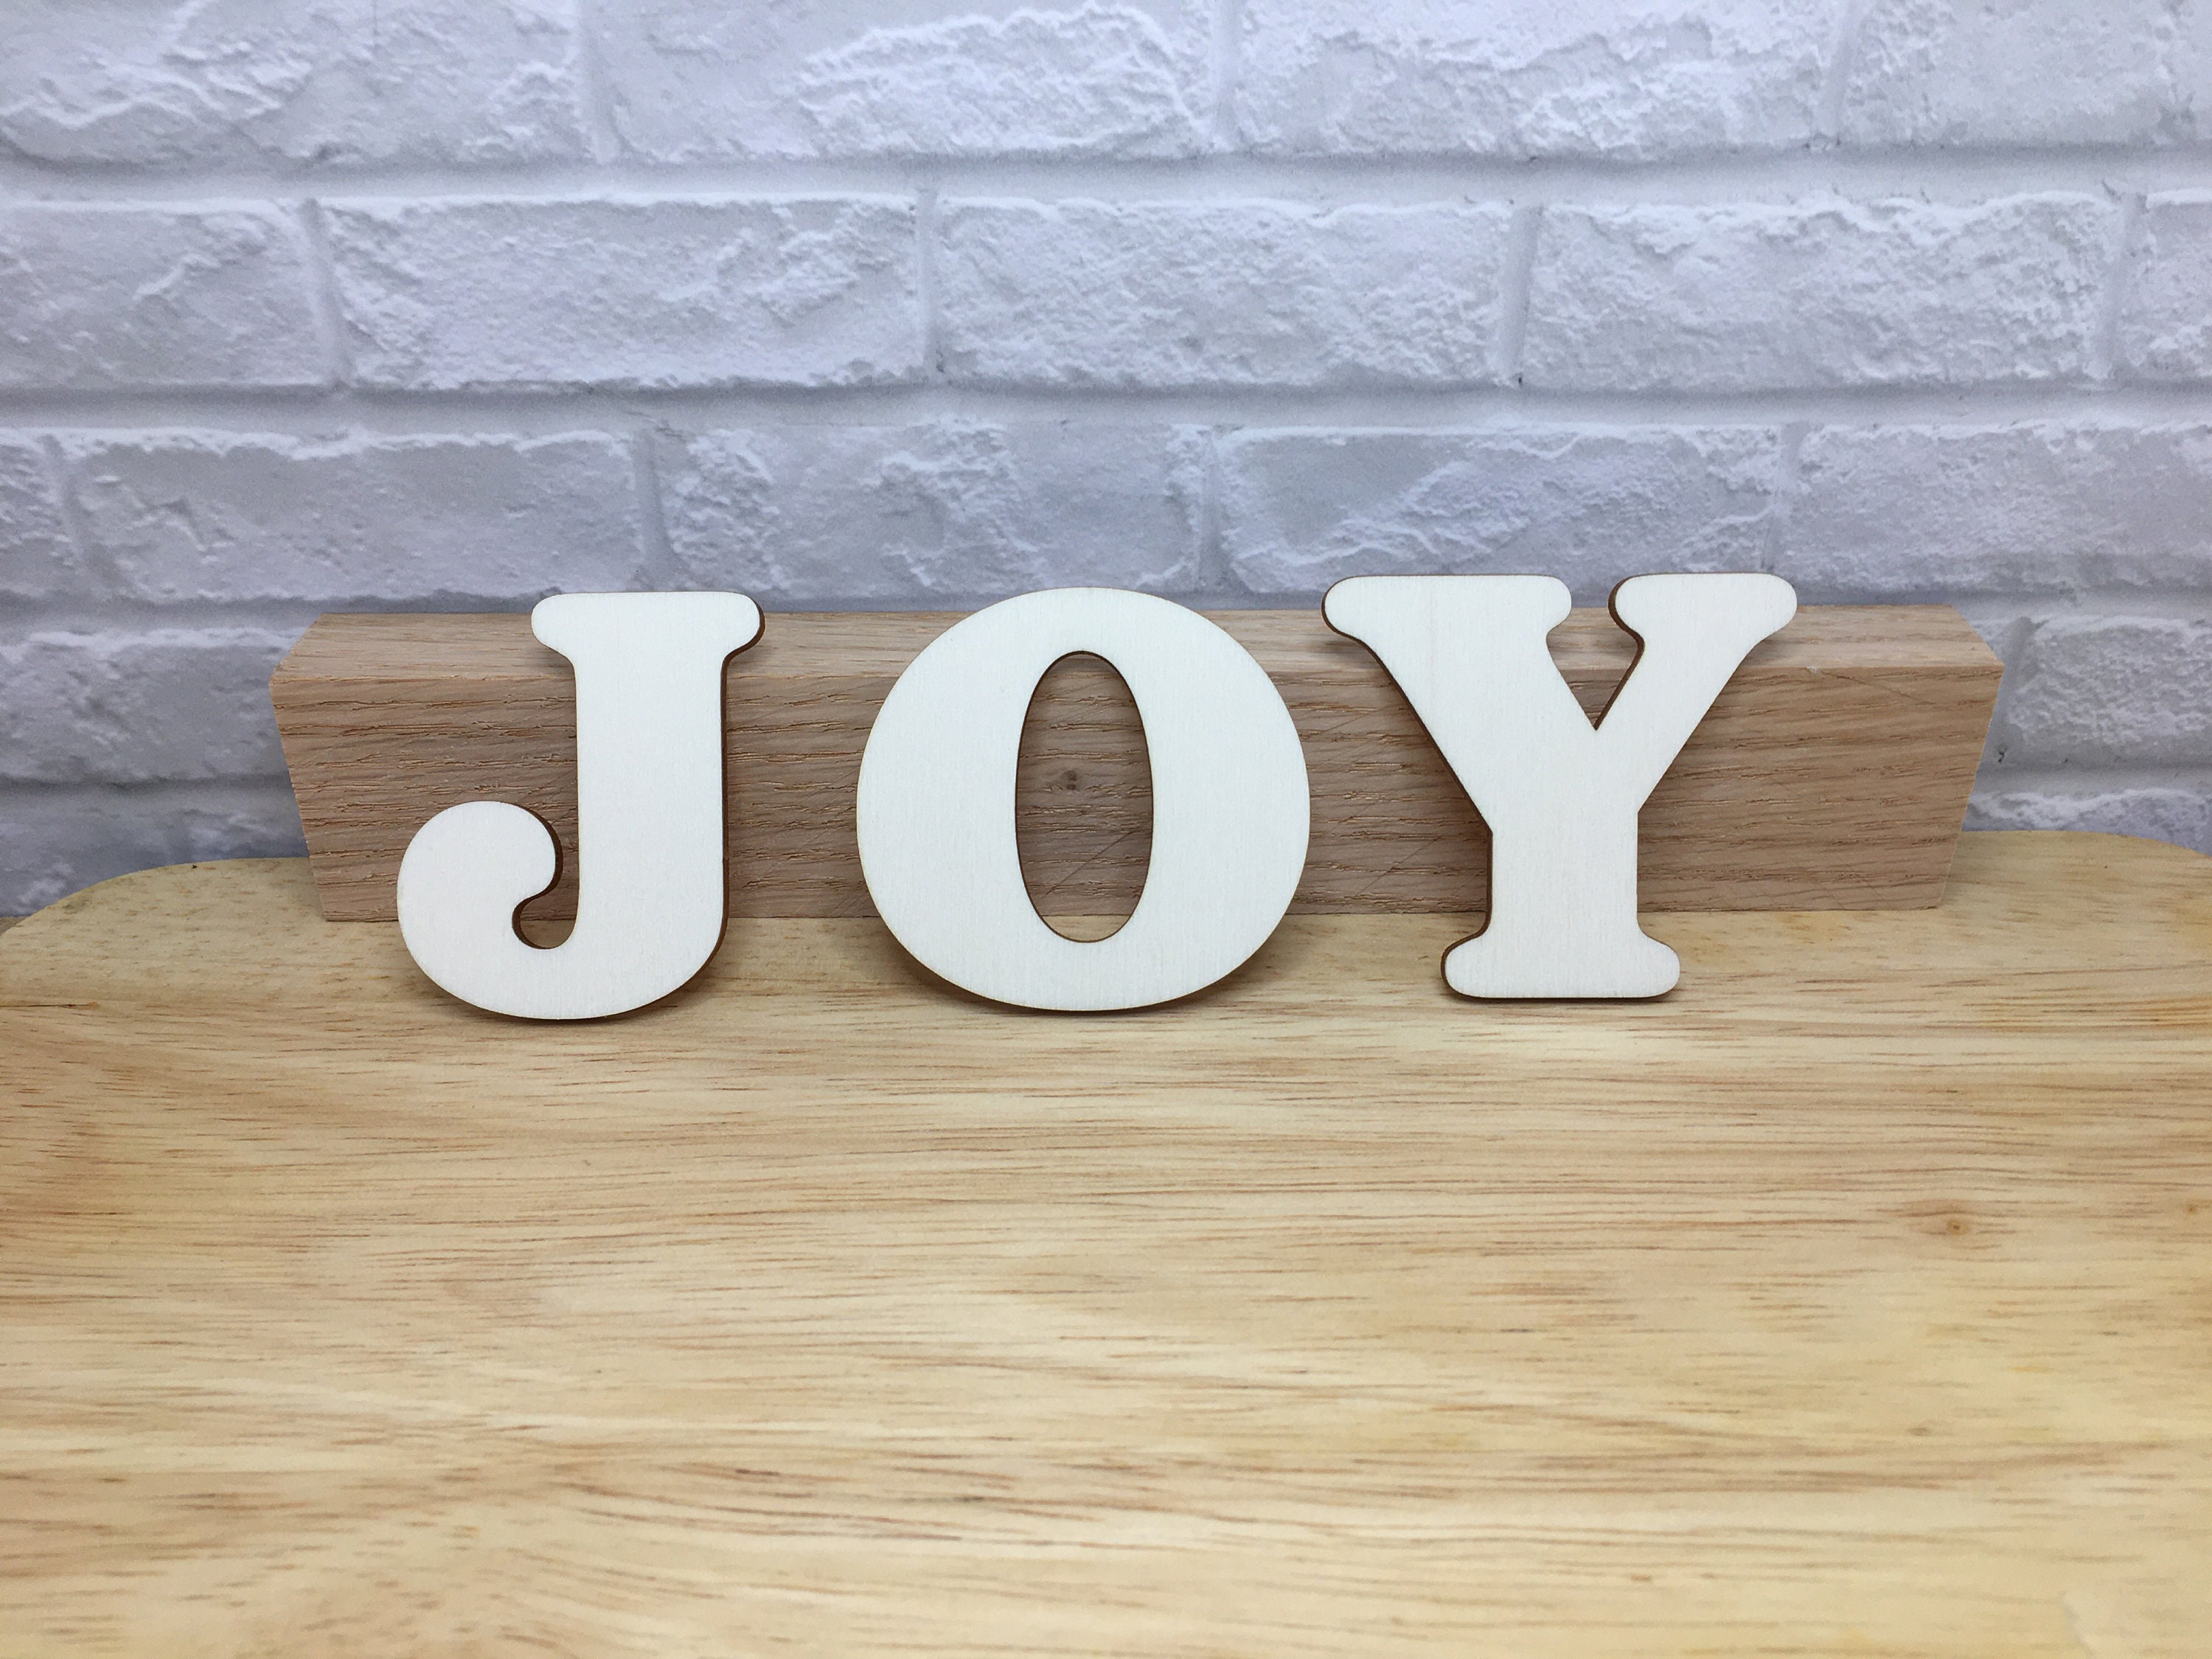 Decorative Letters for Shelf Decor, Initial Freestanding Wood